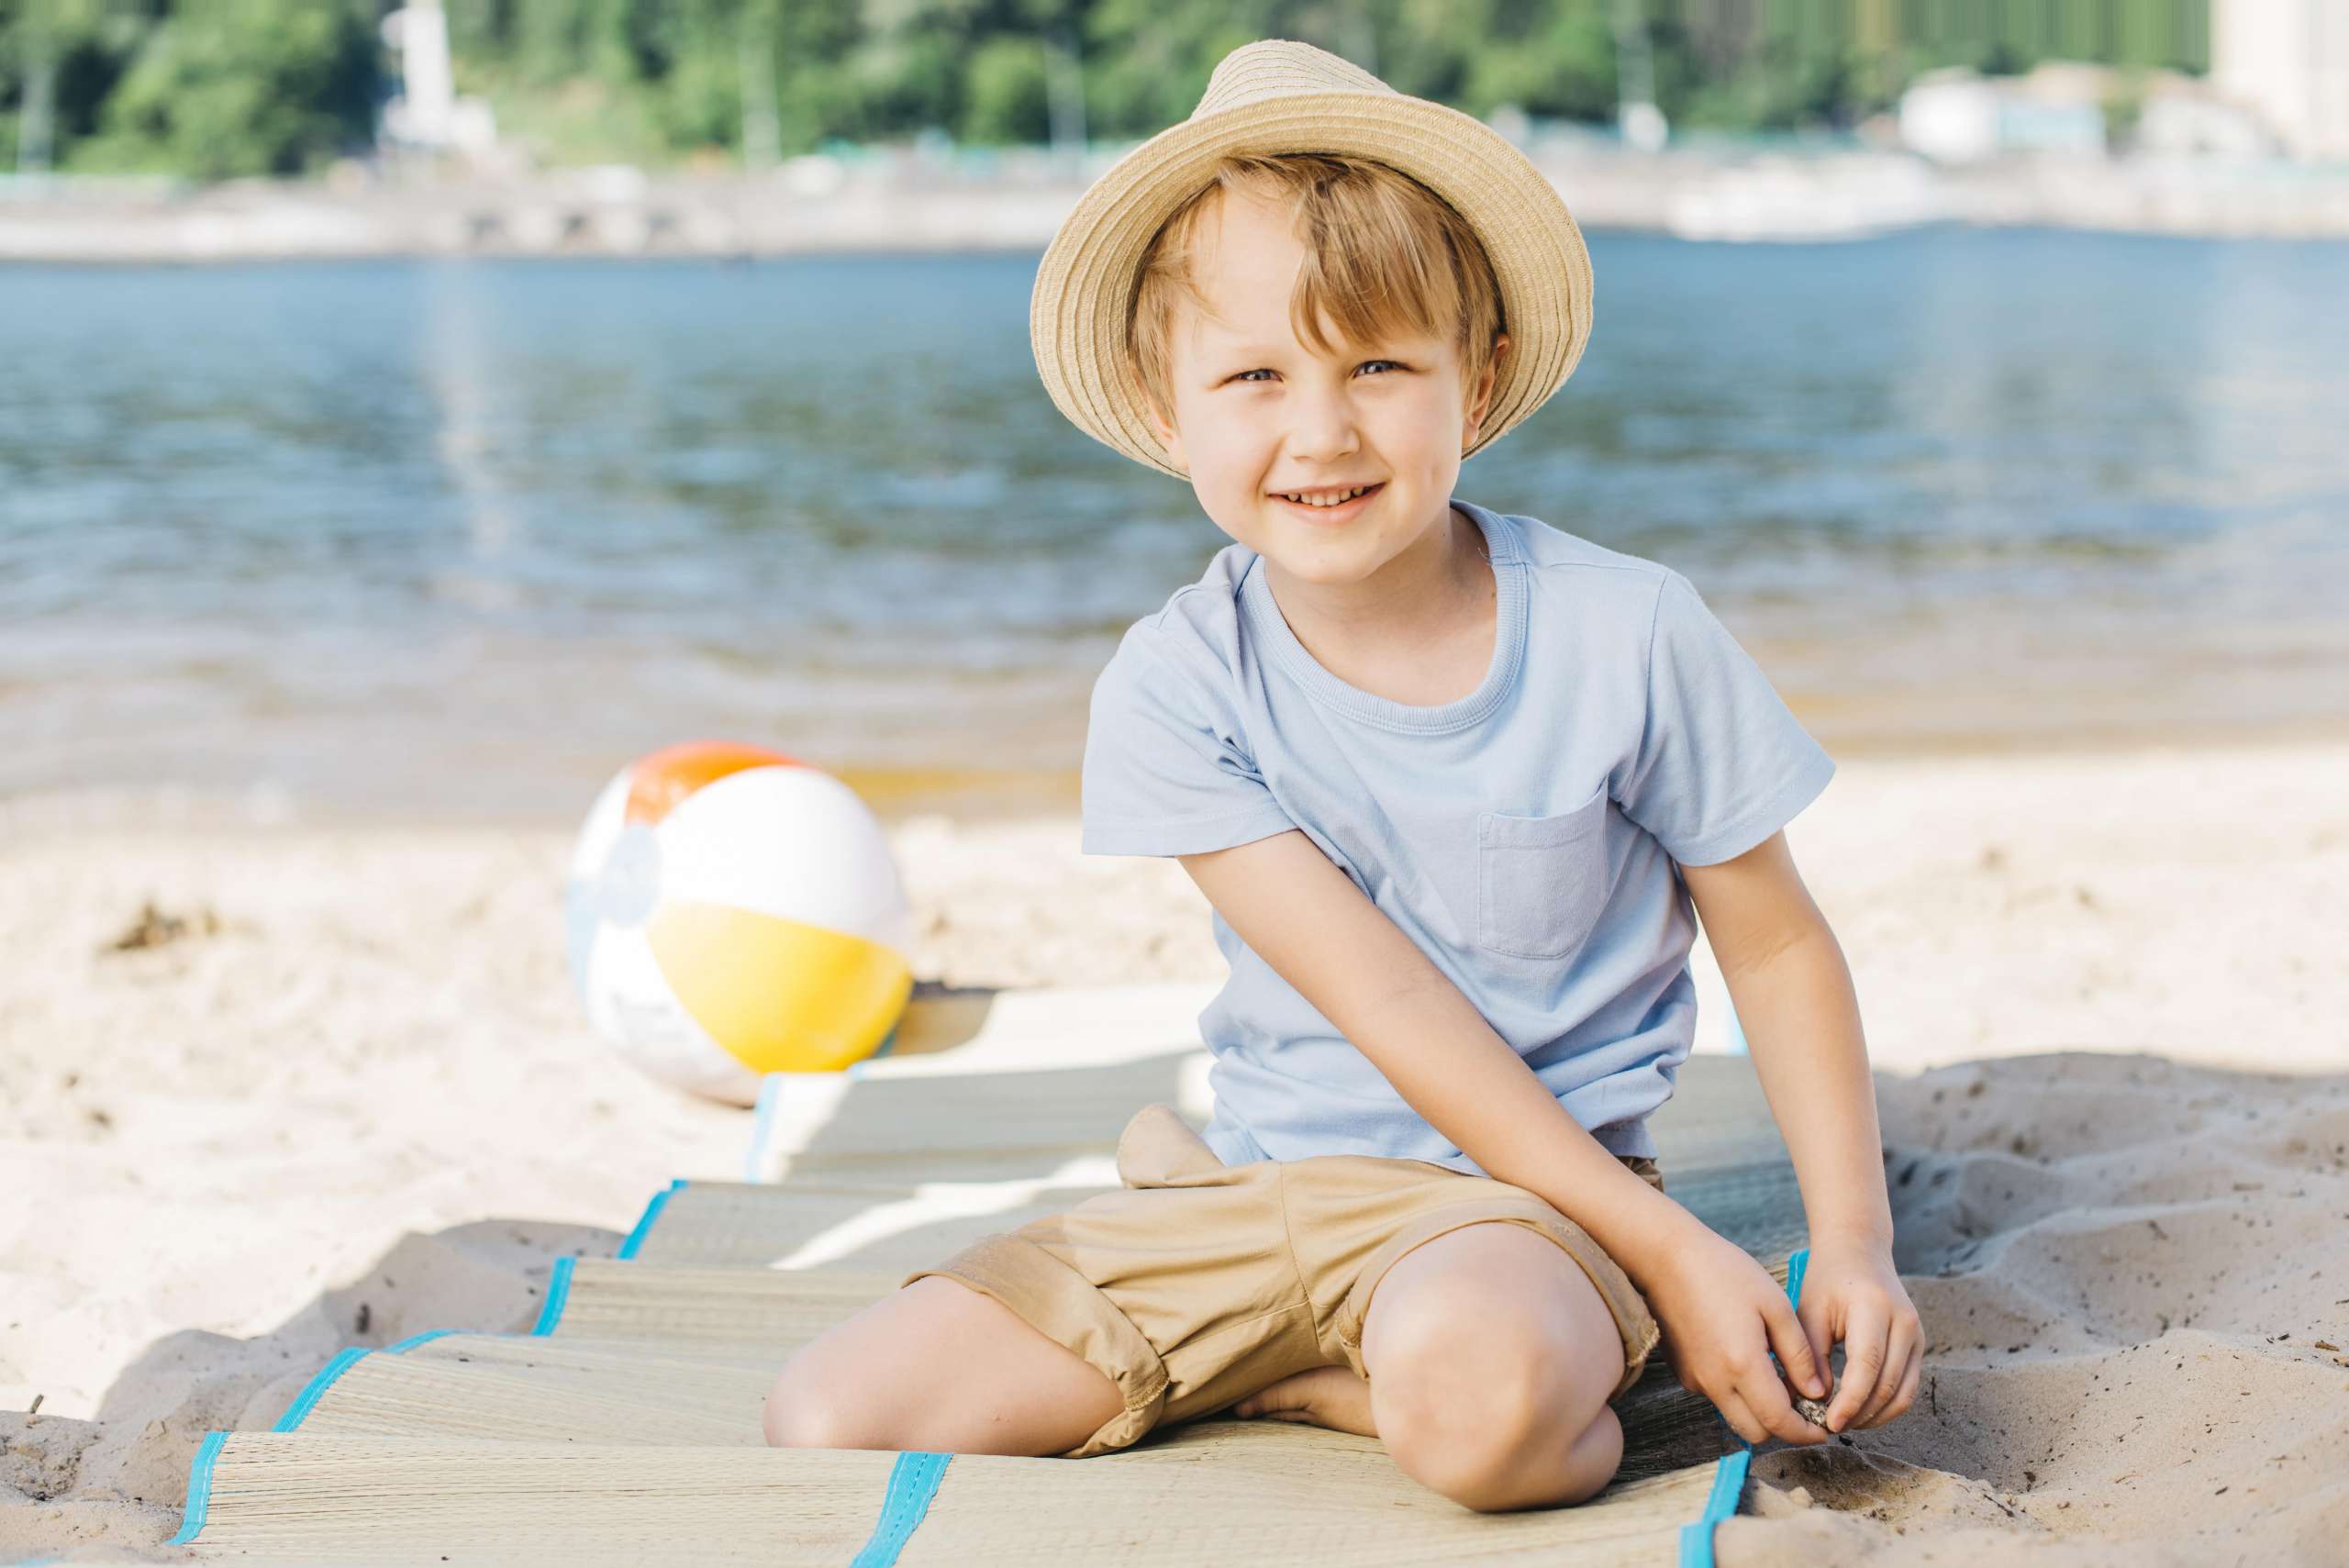 How to protect your active child from sunstroke?